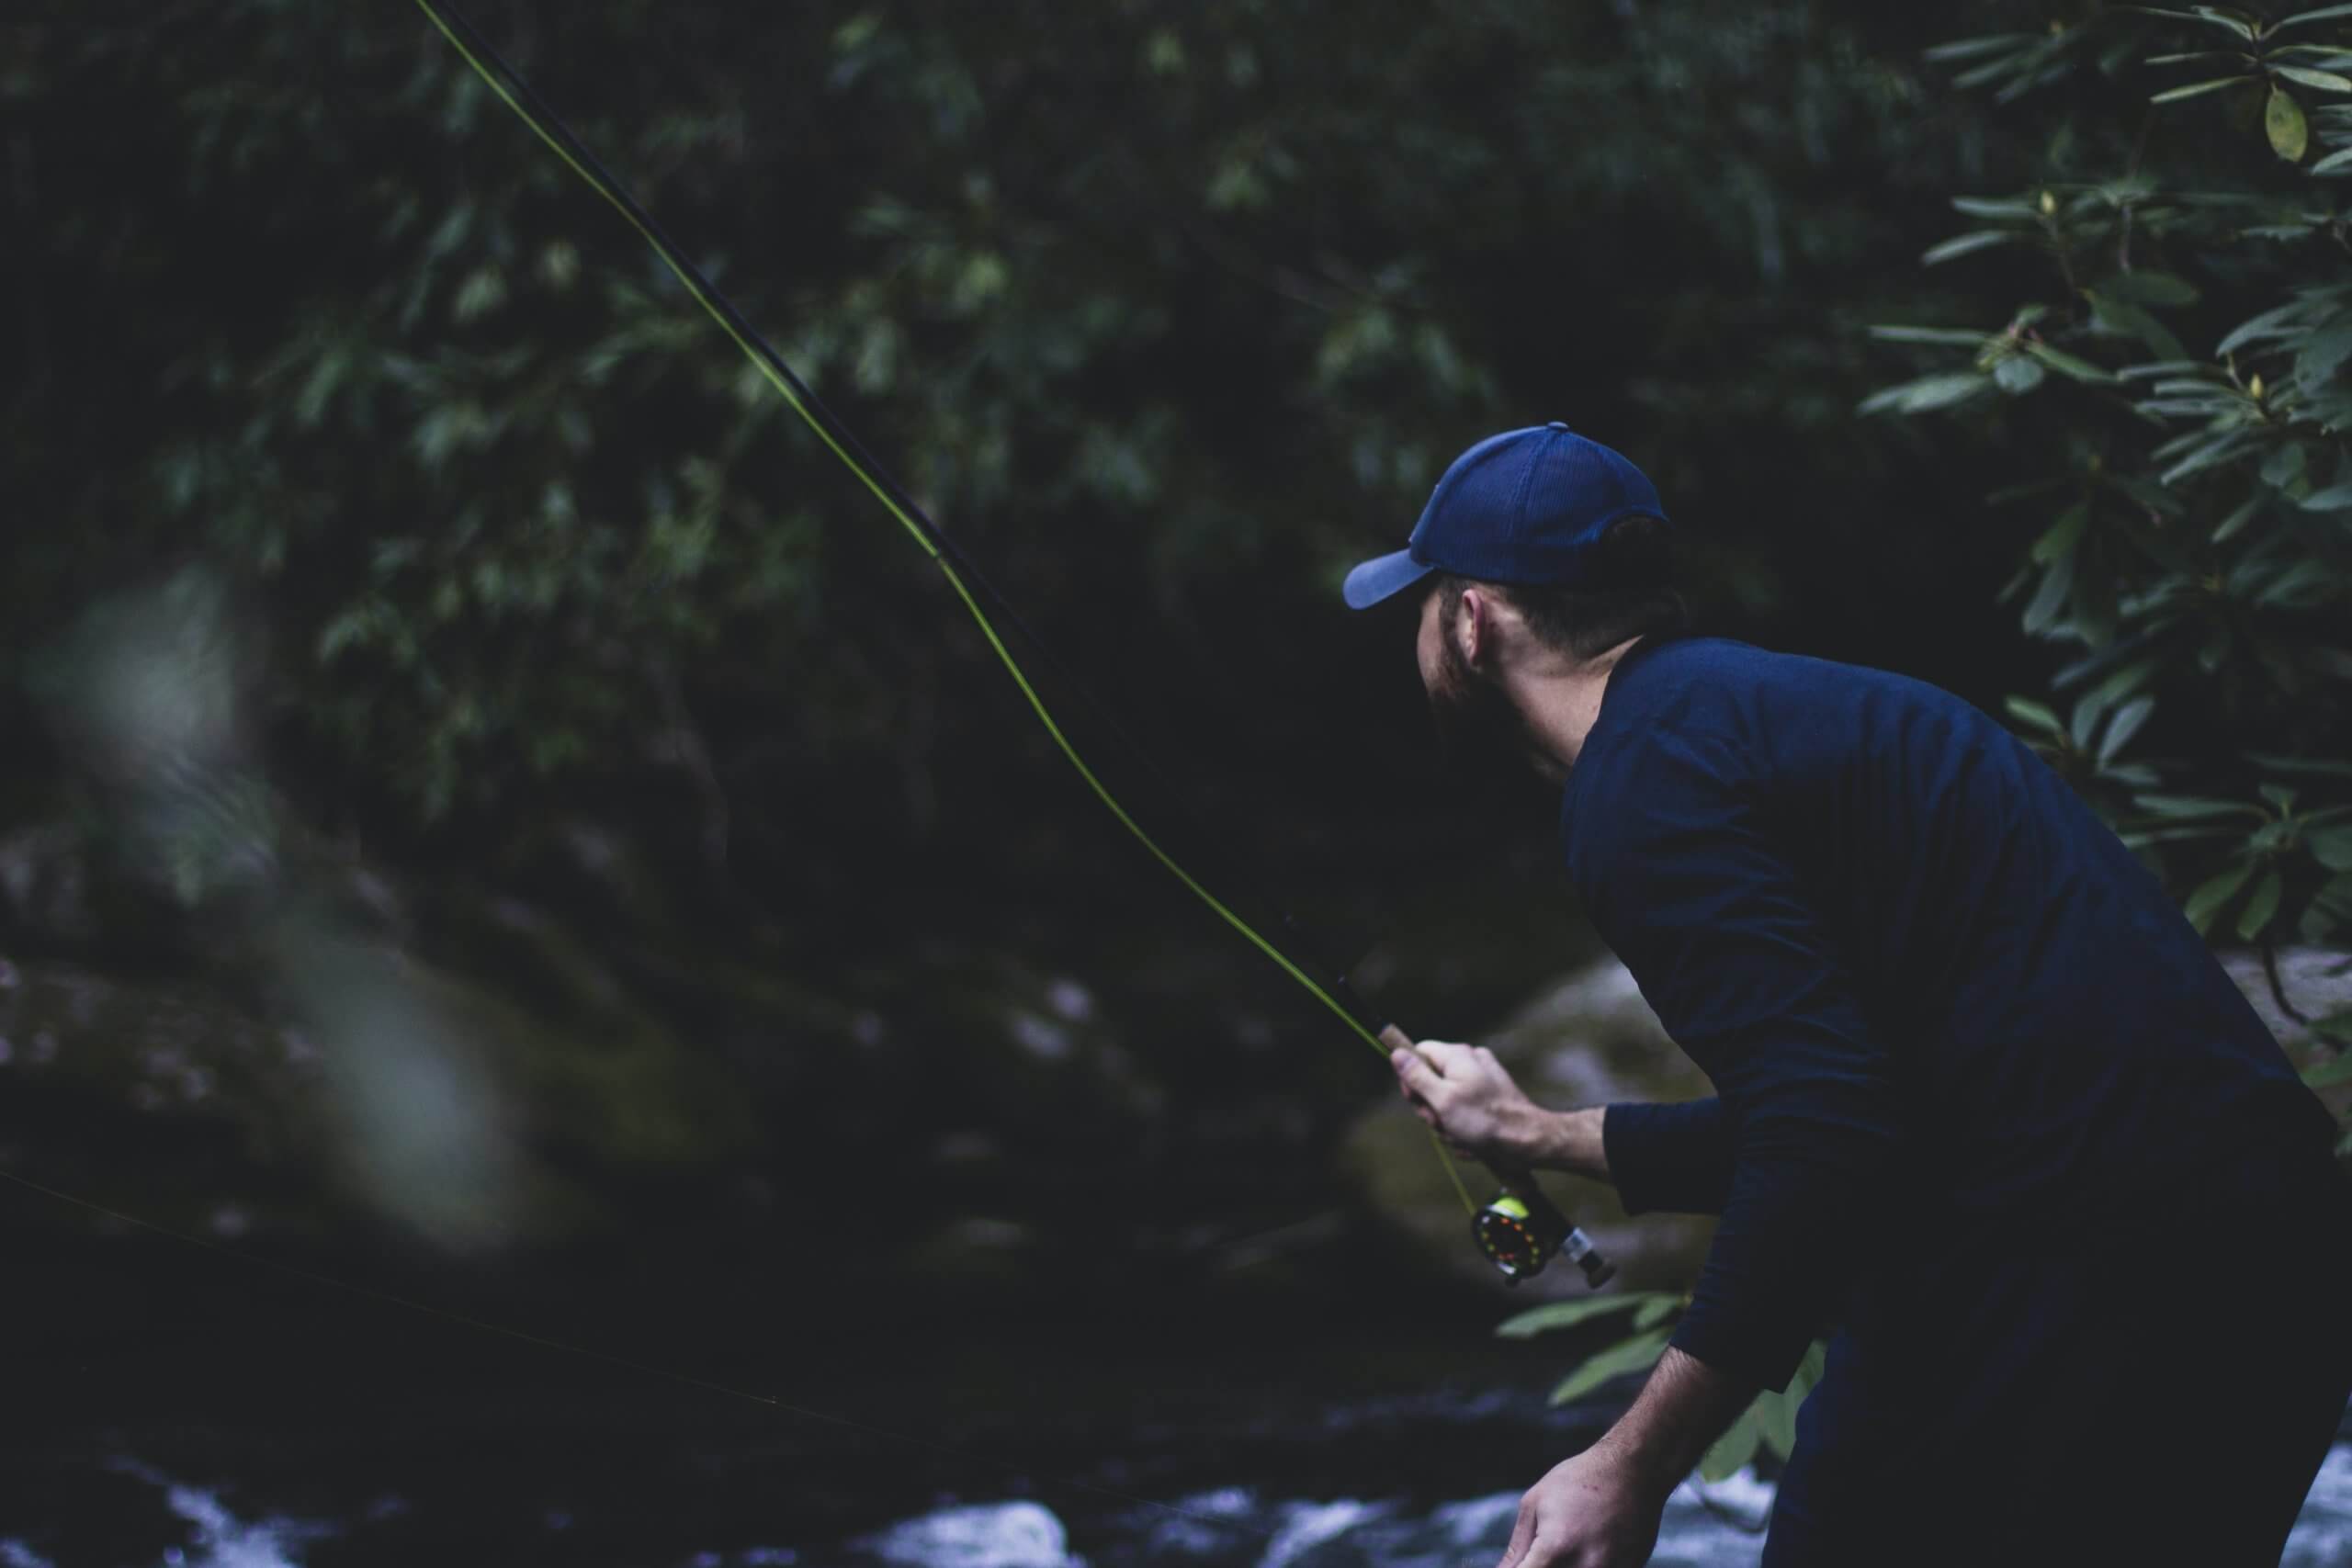 A man in a navy blue shirt and hat casting a fly rod with a dark, green background